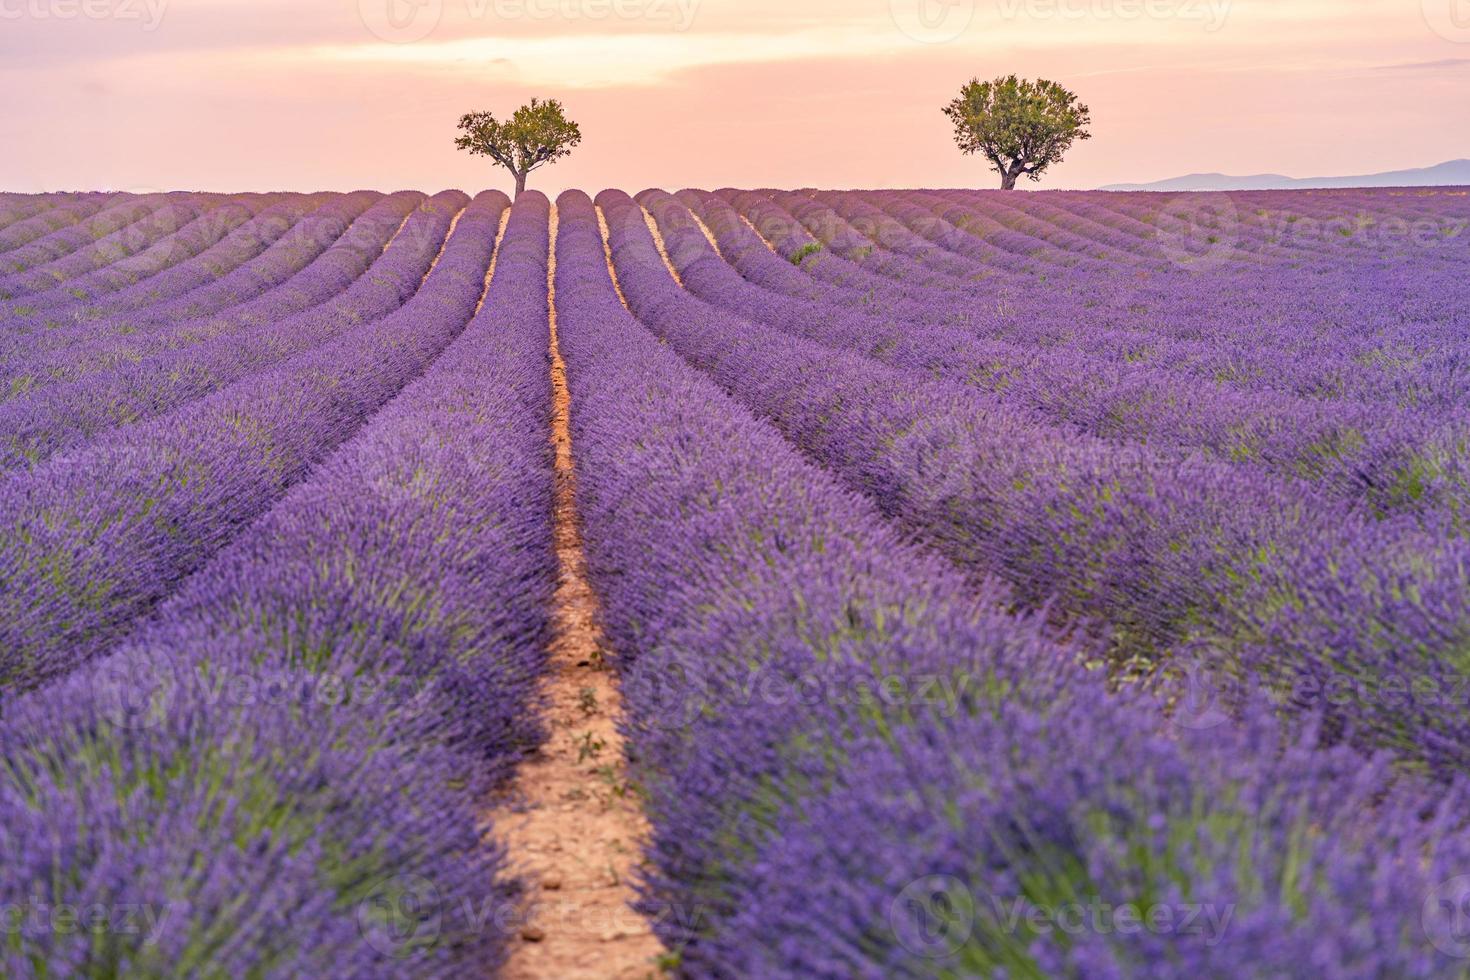 Lavender field summer sunset landscape near Valensole. Provence, France. Wonderful nature scenery, artistic sunset light with blurred background, inspirational nature view. Beautiful peaceful scene photo